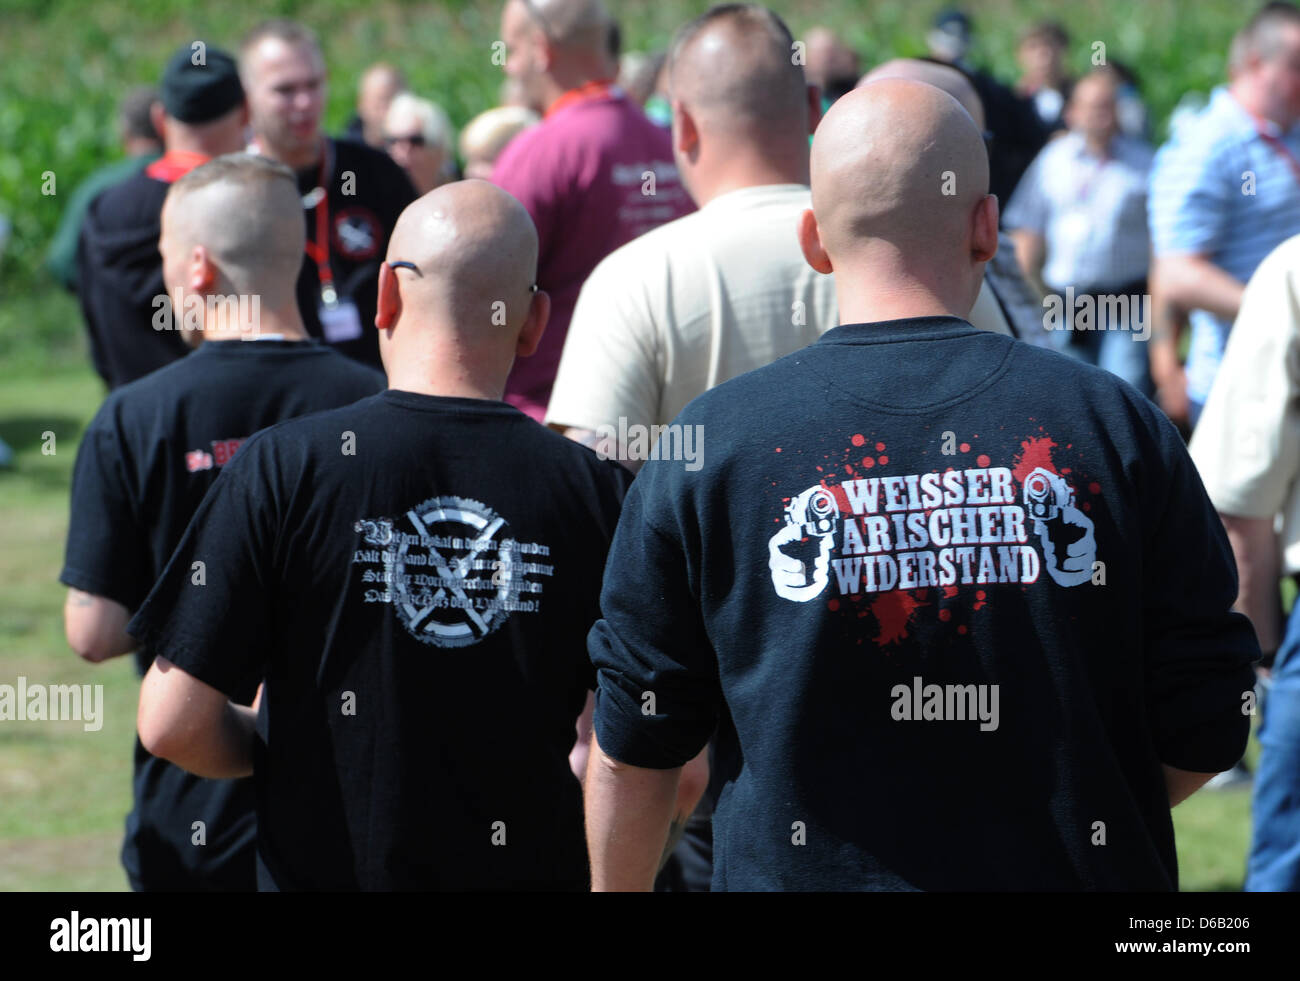 (FILE) An archive photo dated 11 August 2012 shows visitors to the 'Press Fest' by the far-right extremist journal 'Deutsche Stimme' ('German Voice') in Pasewalk, Germany. According to a report commissioned by the Amadeu Antonio Foundation, the police and politicians are downplaying the scale of far-right violence again and again only three-quarters of a year after the series of mu Stock Photo